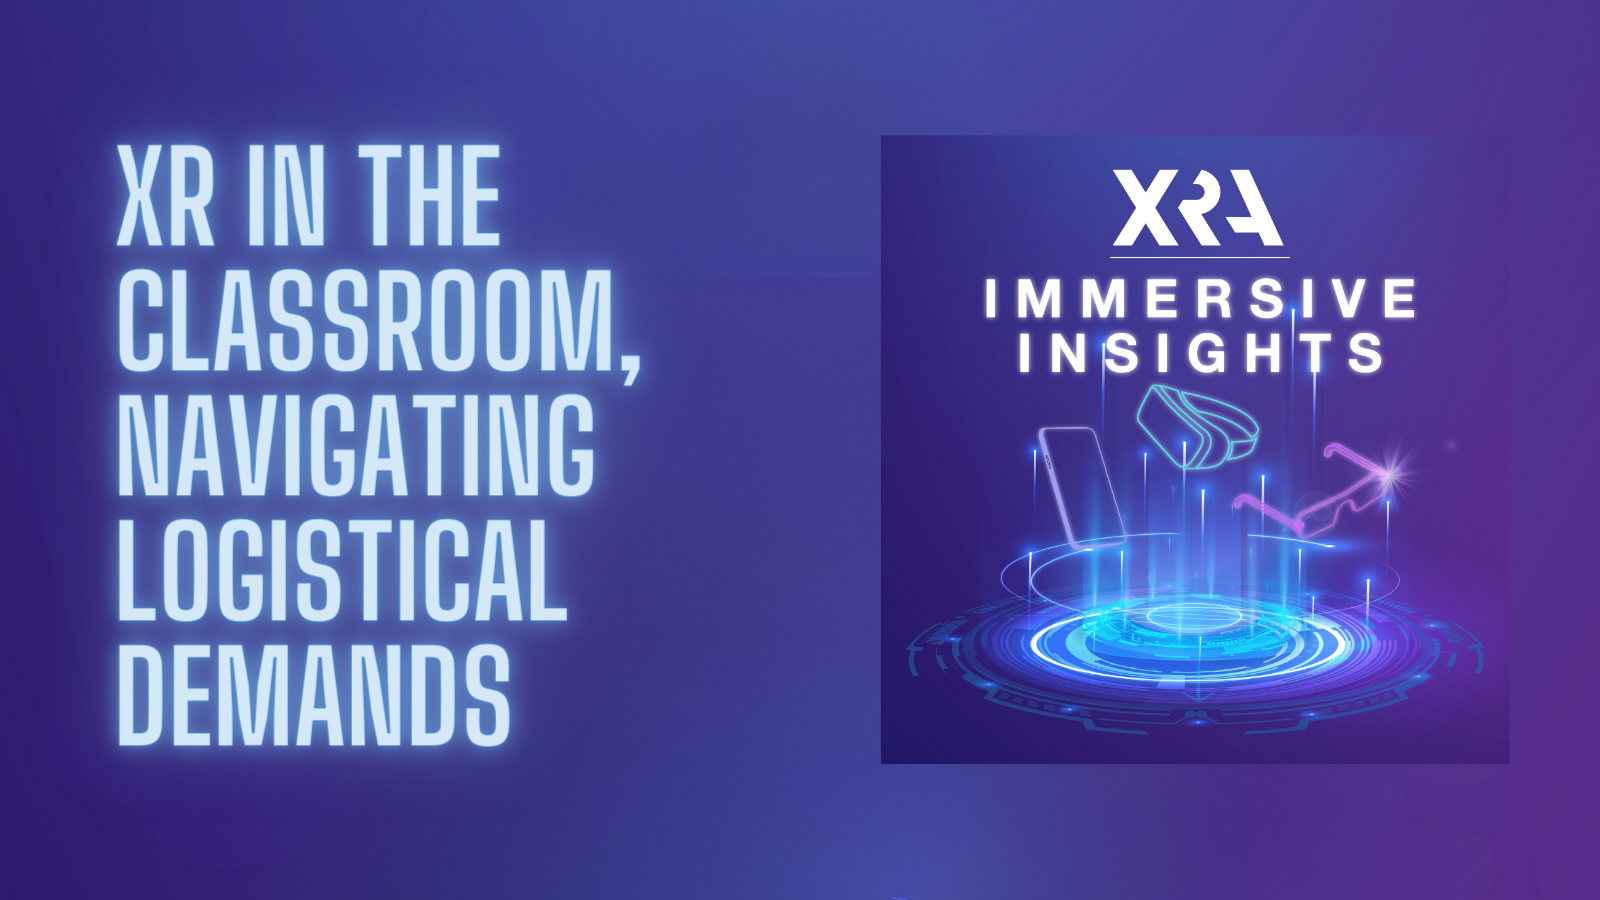 CHECK OUT THE LATEST EPISODE OF “IMMERSIVE INSIGHTS: XR IN THE CLASSROOM”